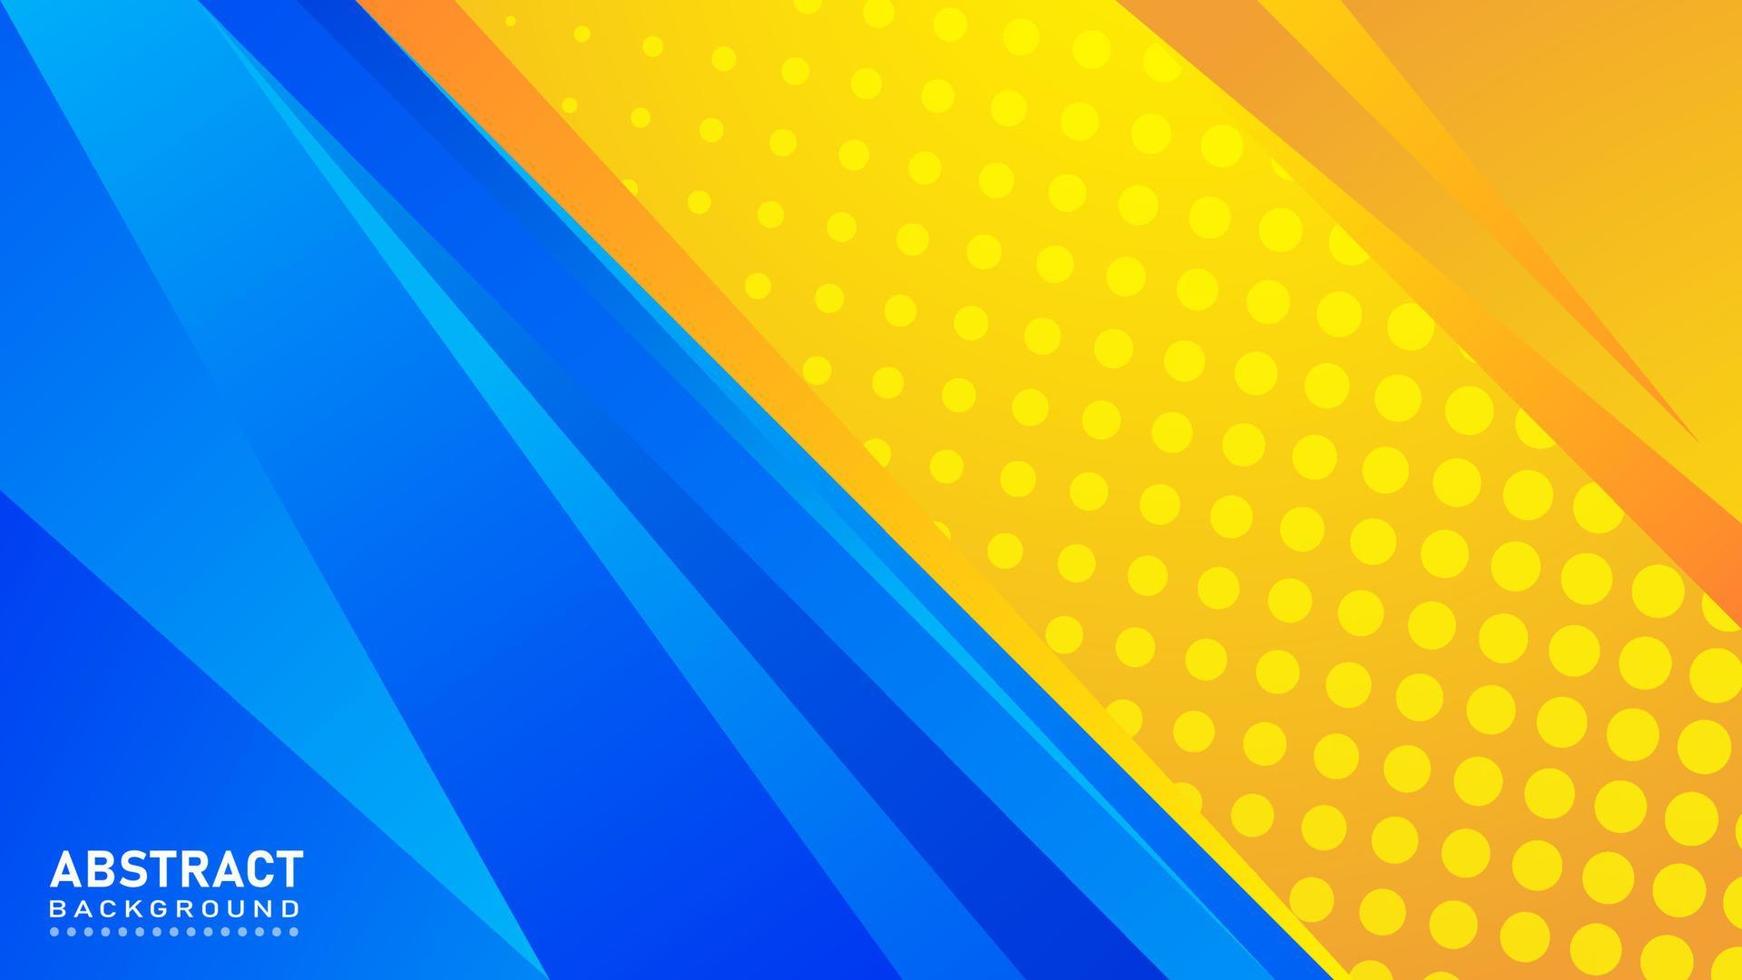 Blue And Yellow Geometric Gradient Background With Abstract Elements